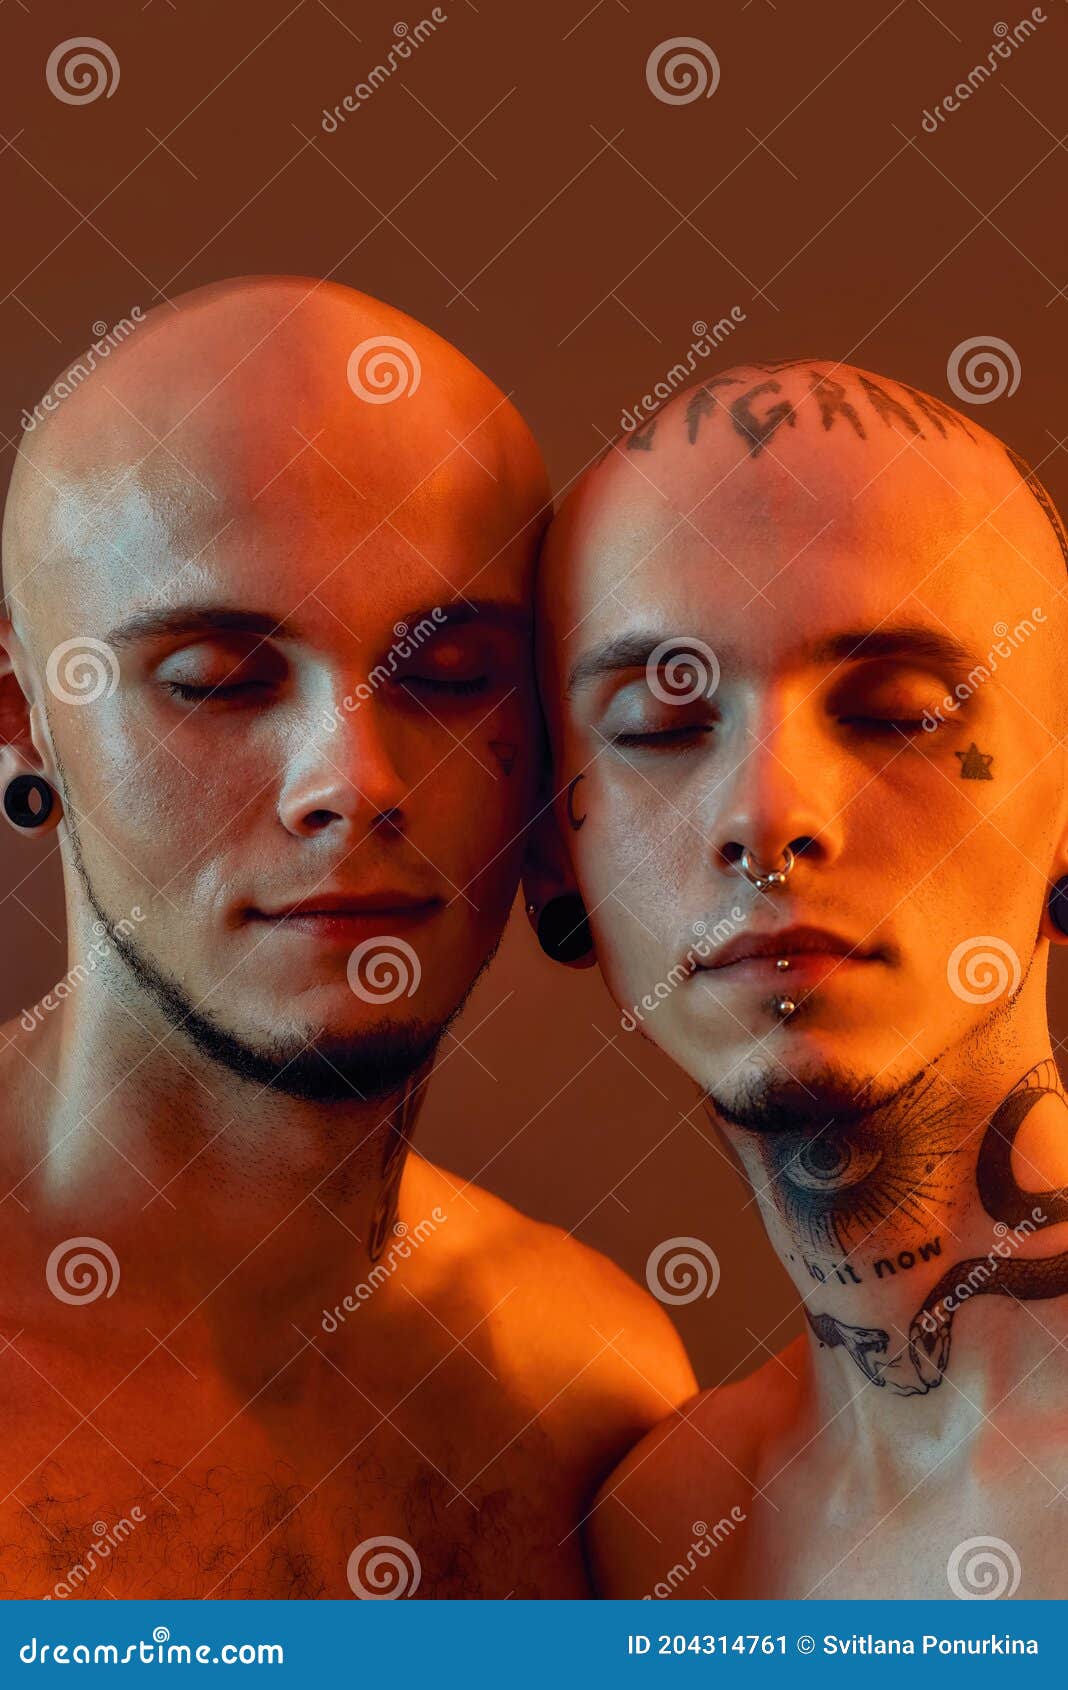 Close Up Portrait Of Young Half Naked Twin Brothers With Tattoos And Piercings Posing Together